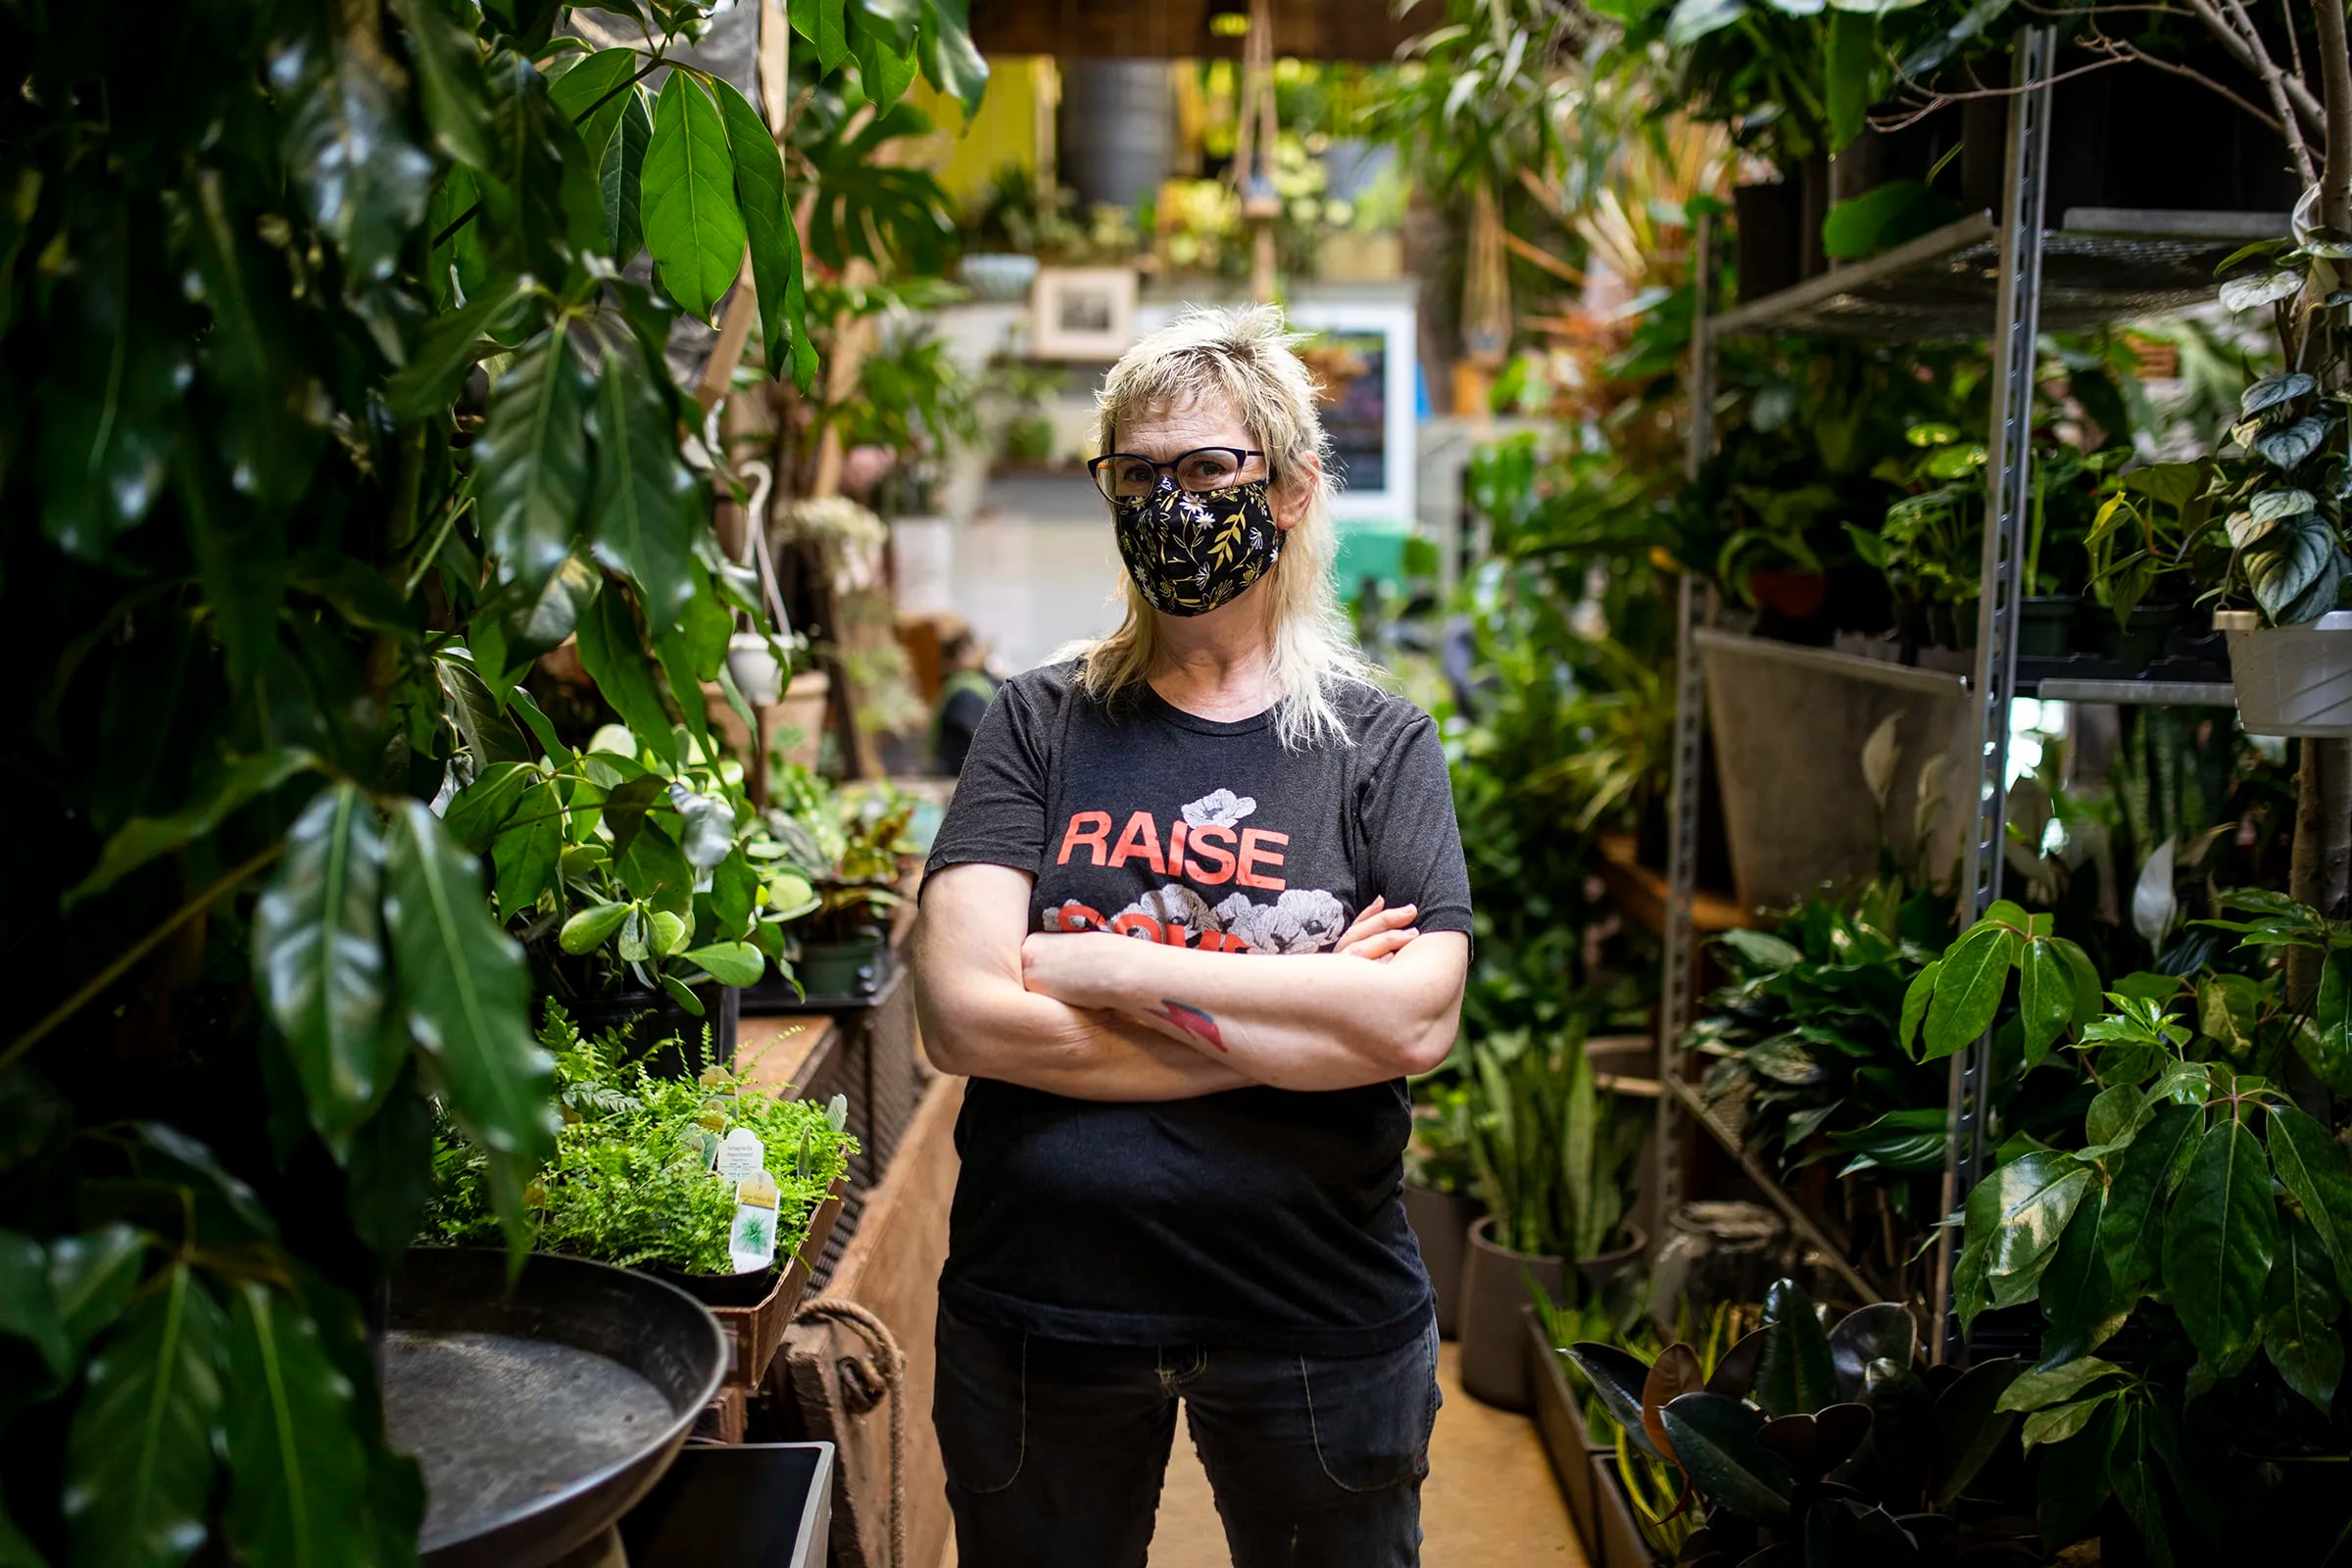 Sue White, owner of City Planter, poses for a portrait inside her shop on Tuesday, Feb. 9, 2021. White and her fellow employees started “The Garage,” where they sell inexpensive cuttings of plants and merchandise that doesn’t pass quality control. All the proceeds made are donated to different organizations every month. “It was awesome,” White said. “The first donation we made was very exciting. We didn’t know people would be interested.”